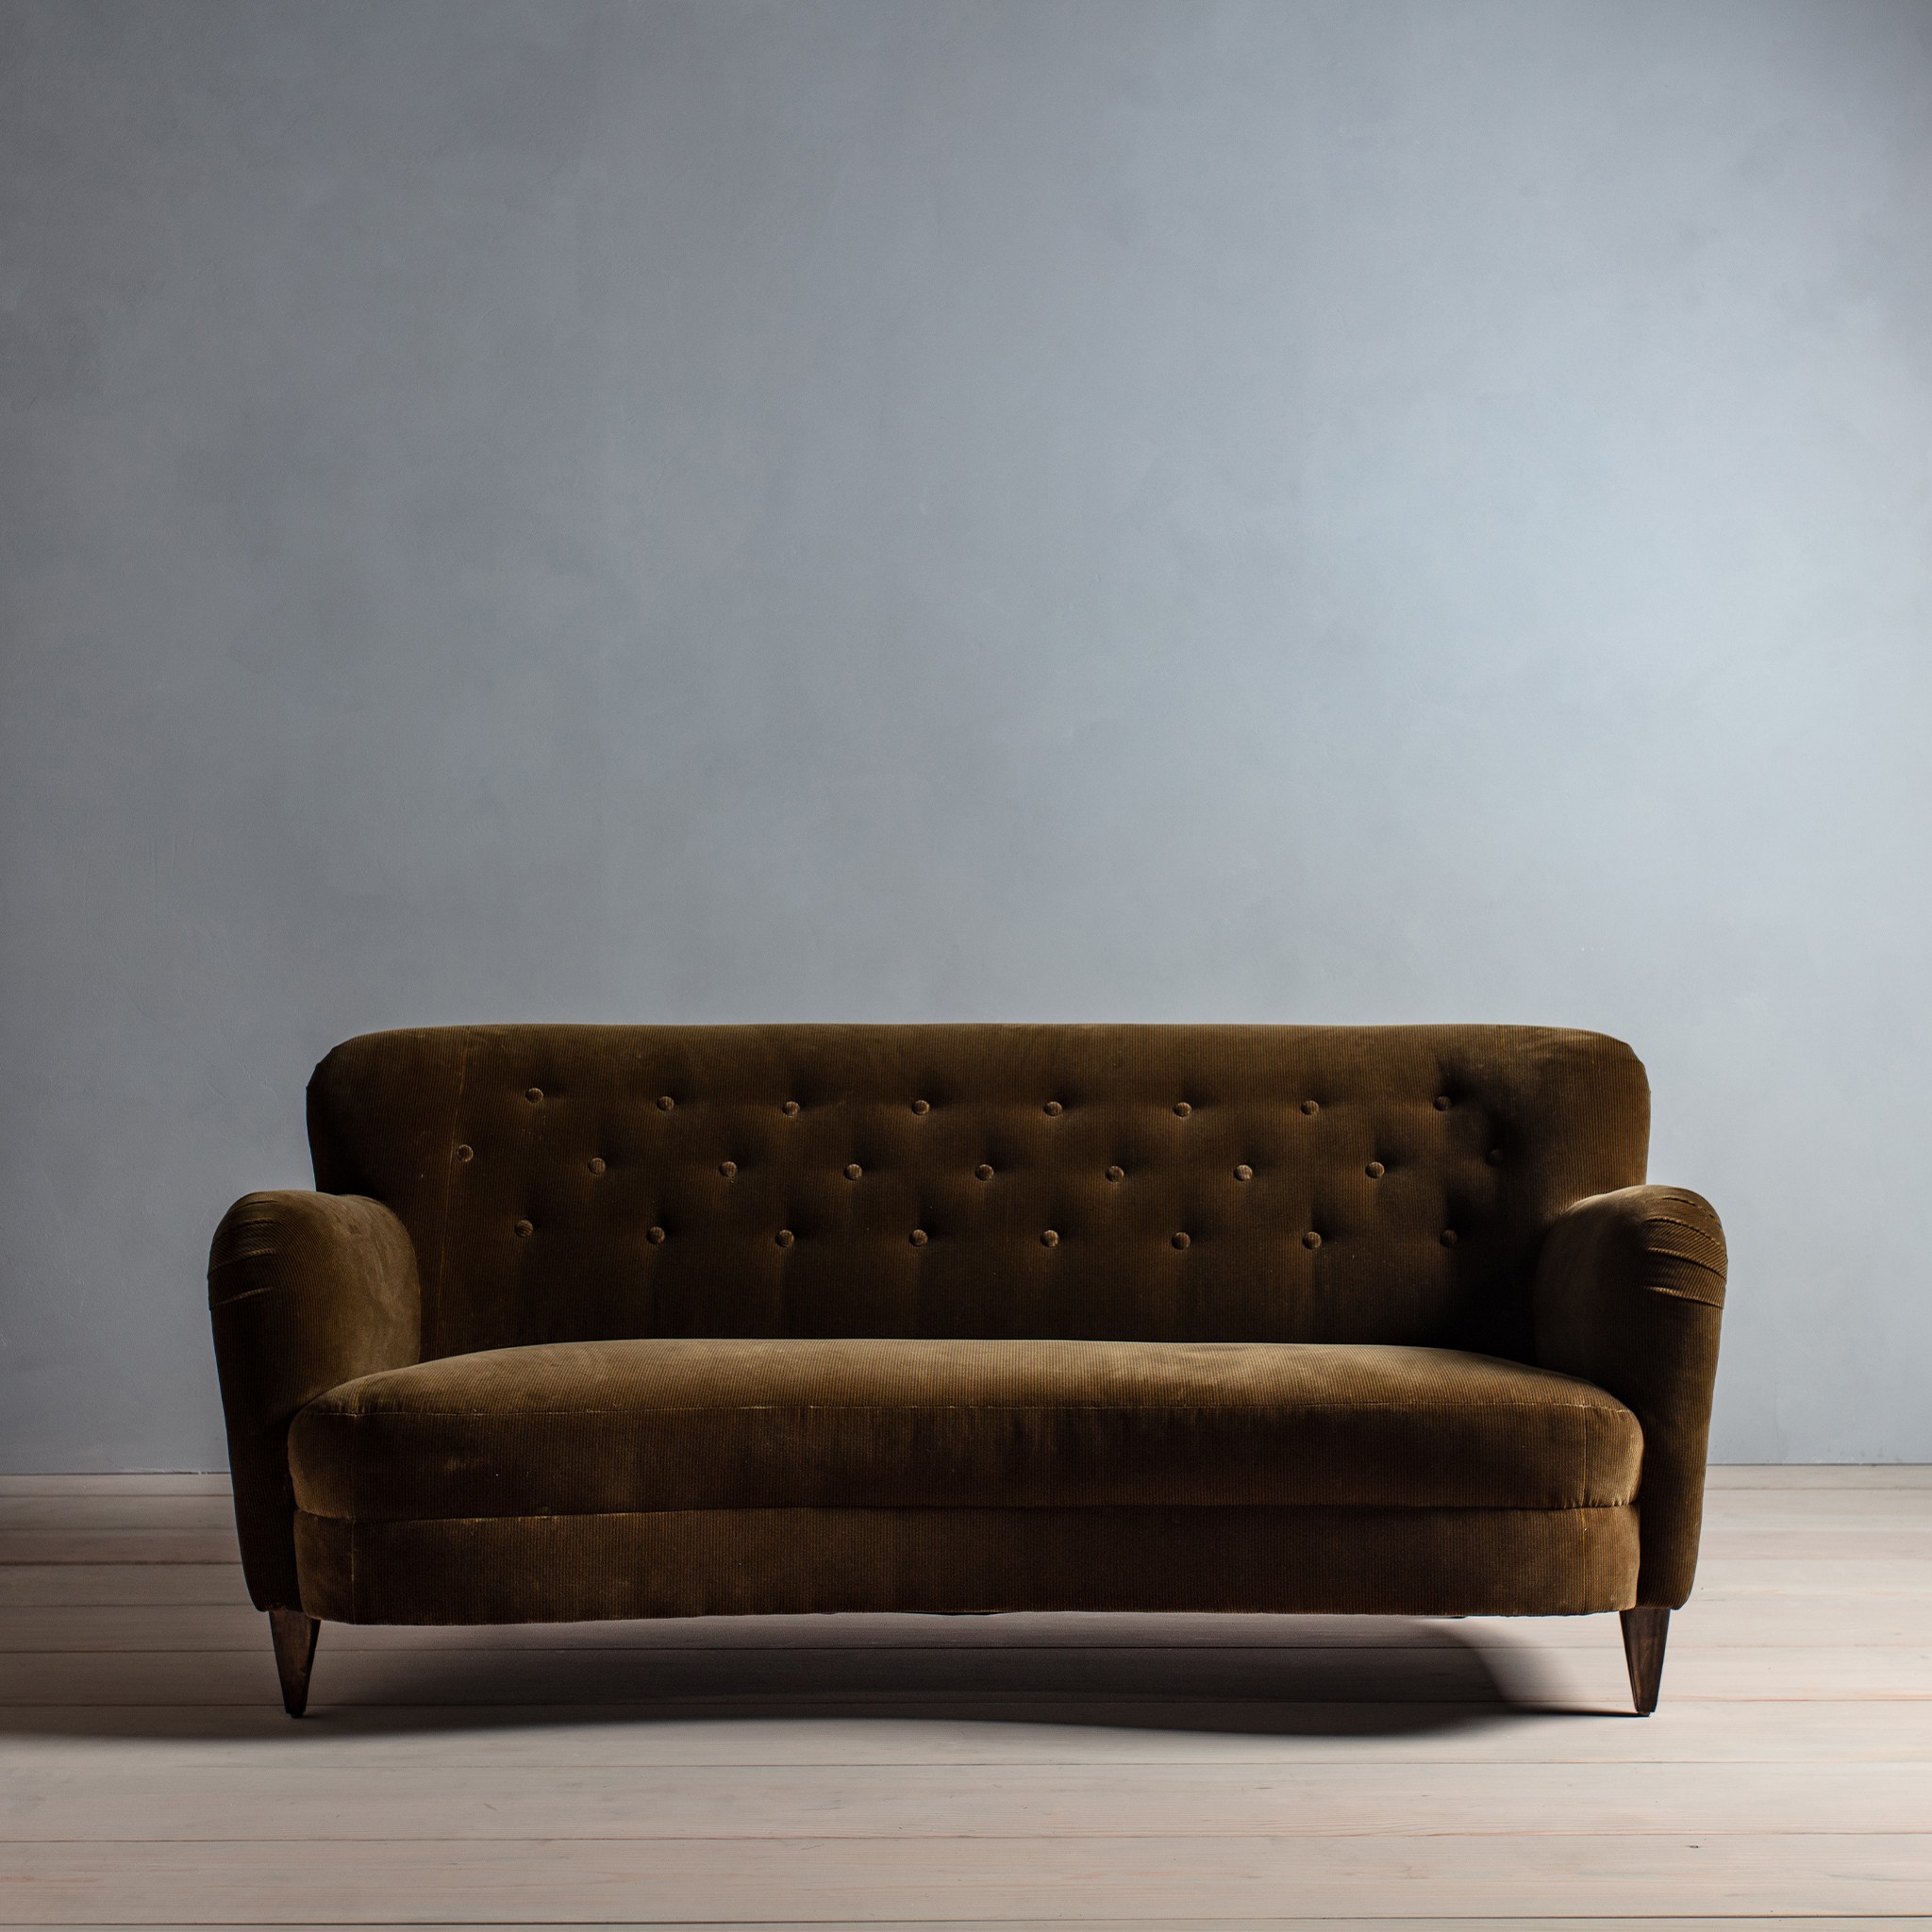 The image of an Mid-century sofa designed for Majander Ltd. product